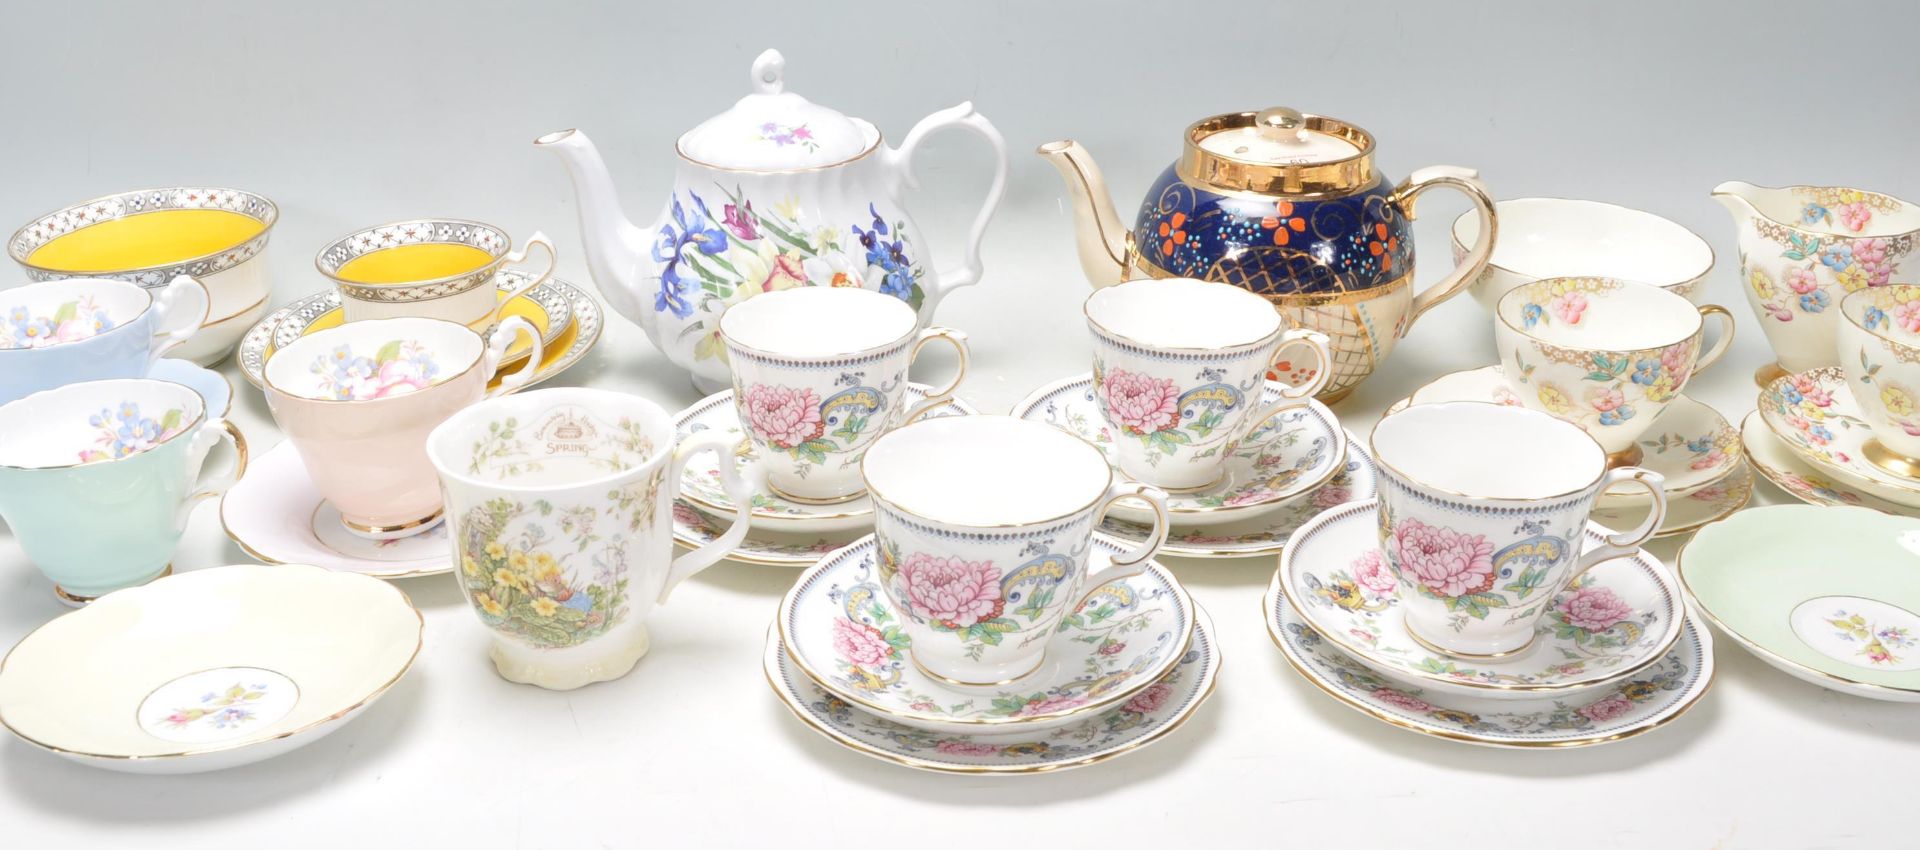 A collection of mixed vintage bone china tea service items, brands include Foley, Royal Doulton,